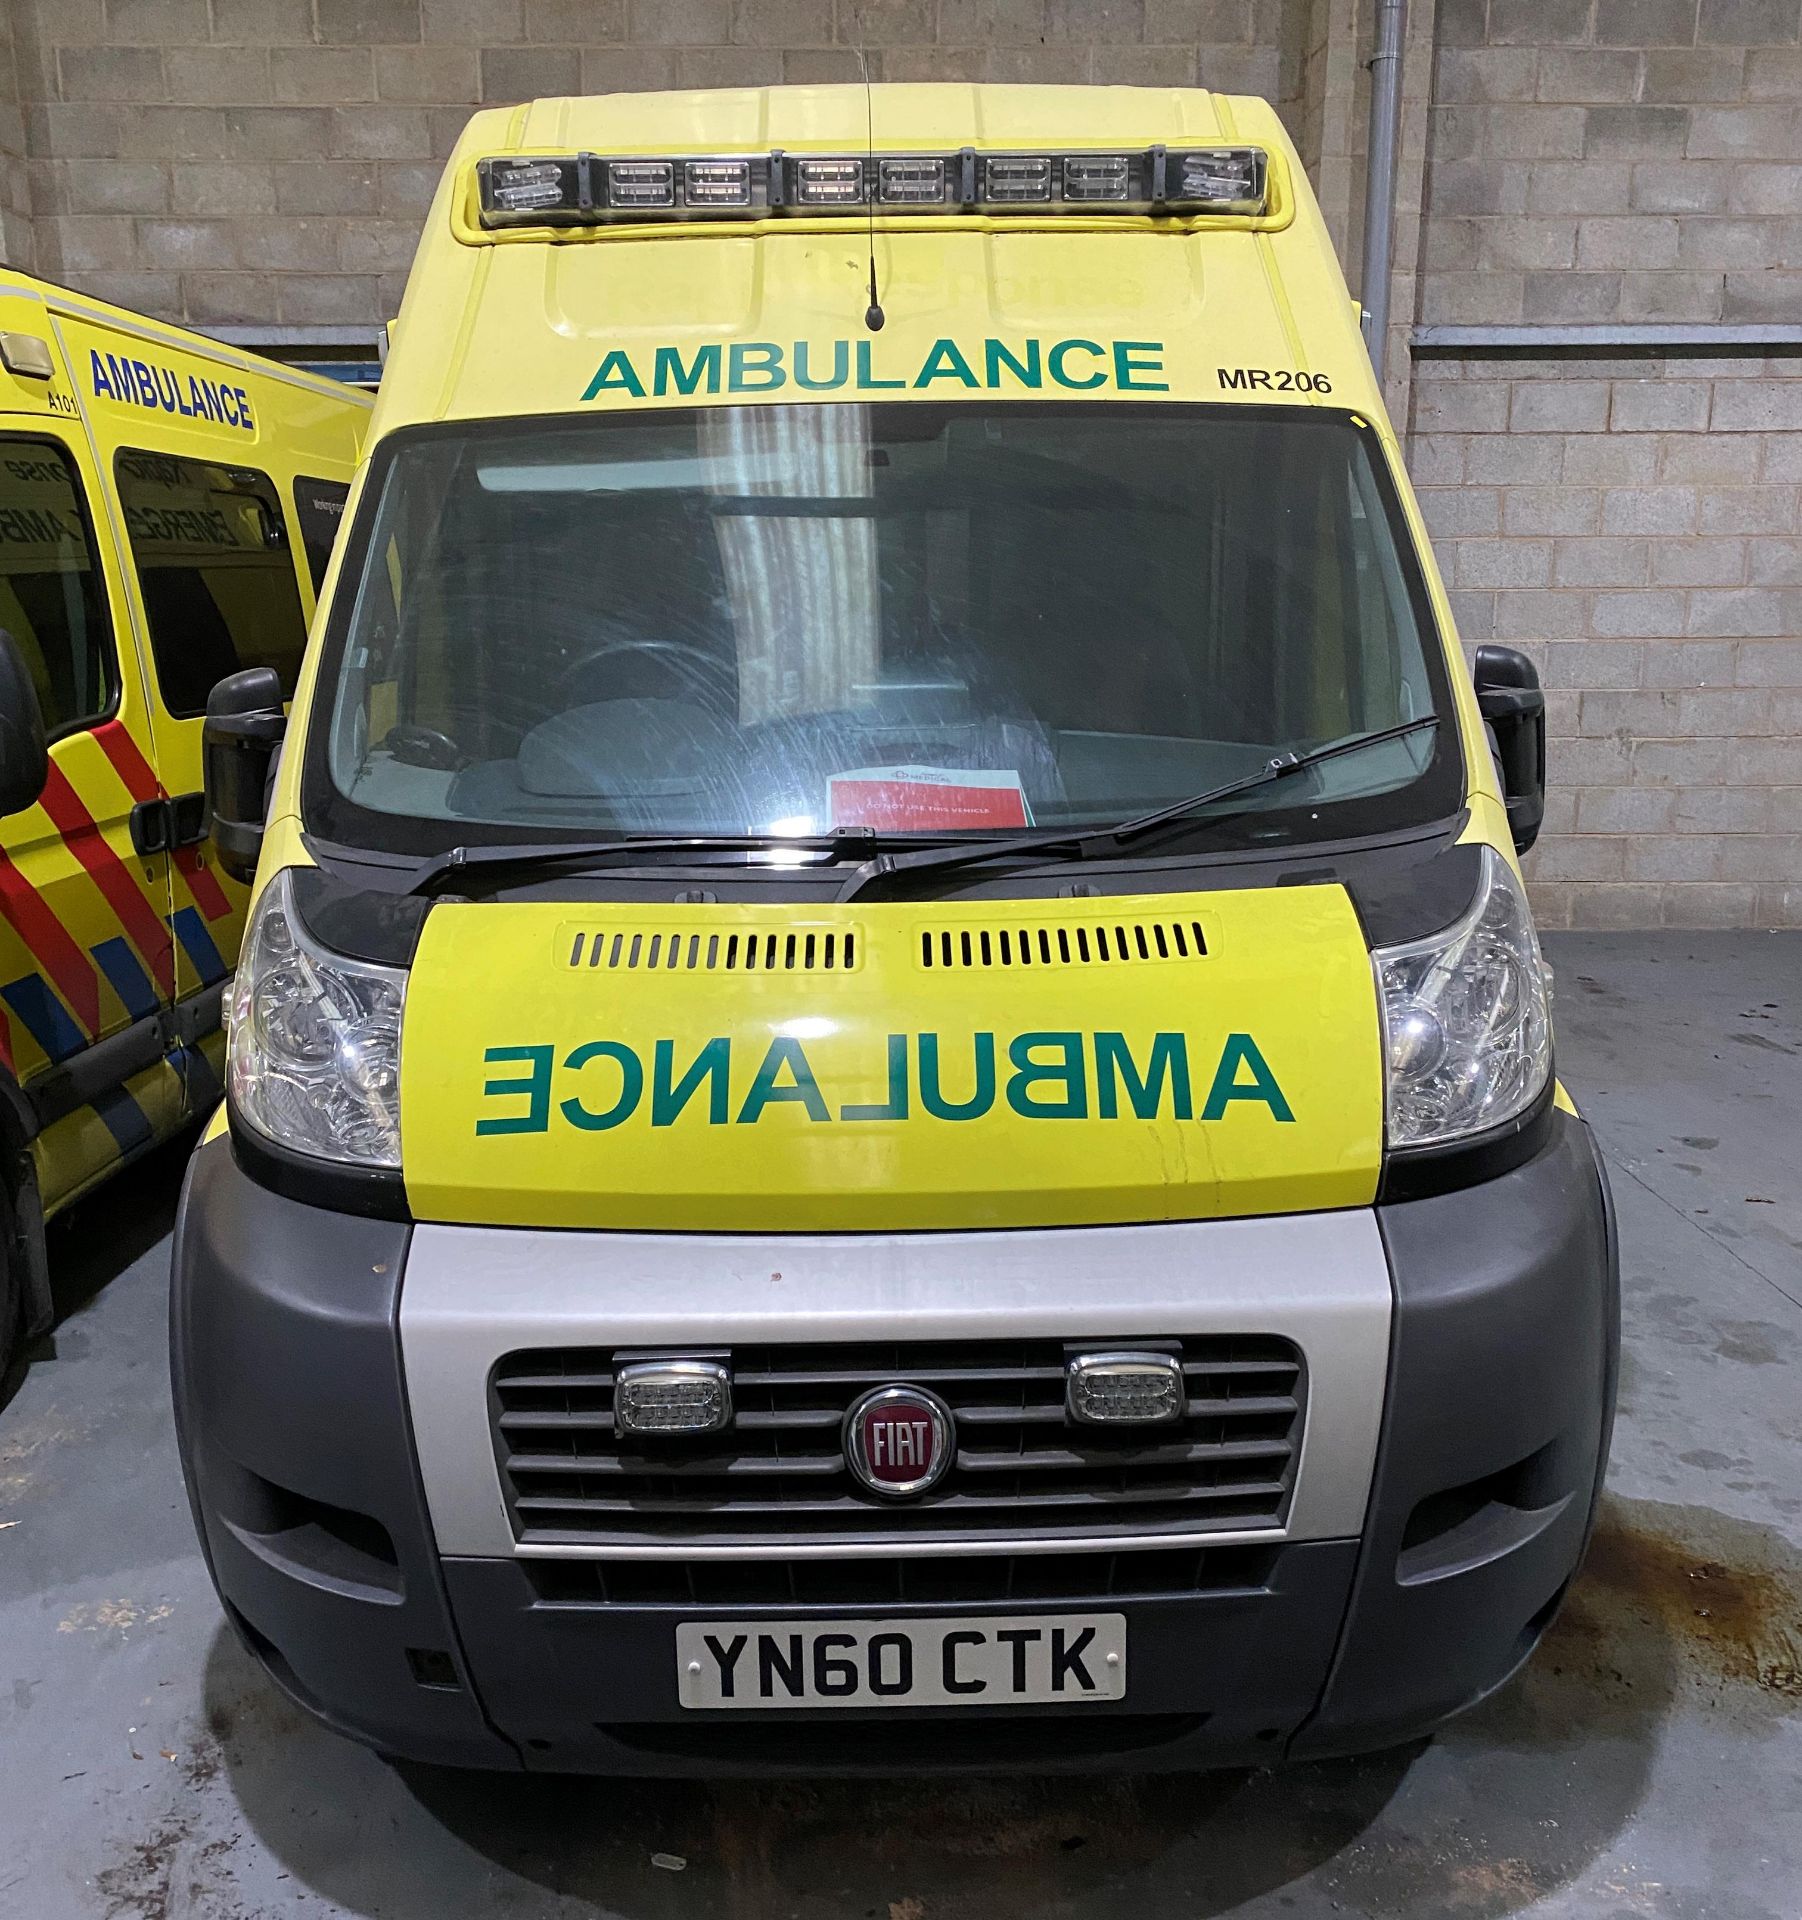 FIAT DUCATO 40 MAXI 160 M-JET VAN LIVERIED UP AS AN AMBULANCE - Diesel - Yellow.